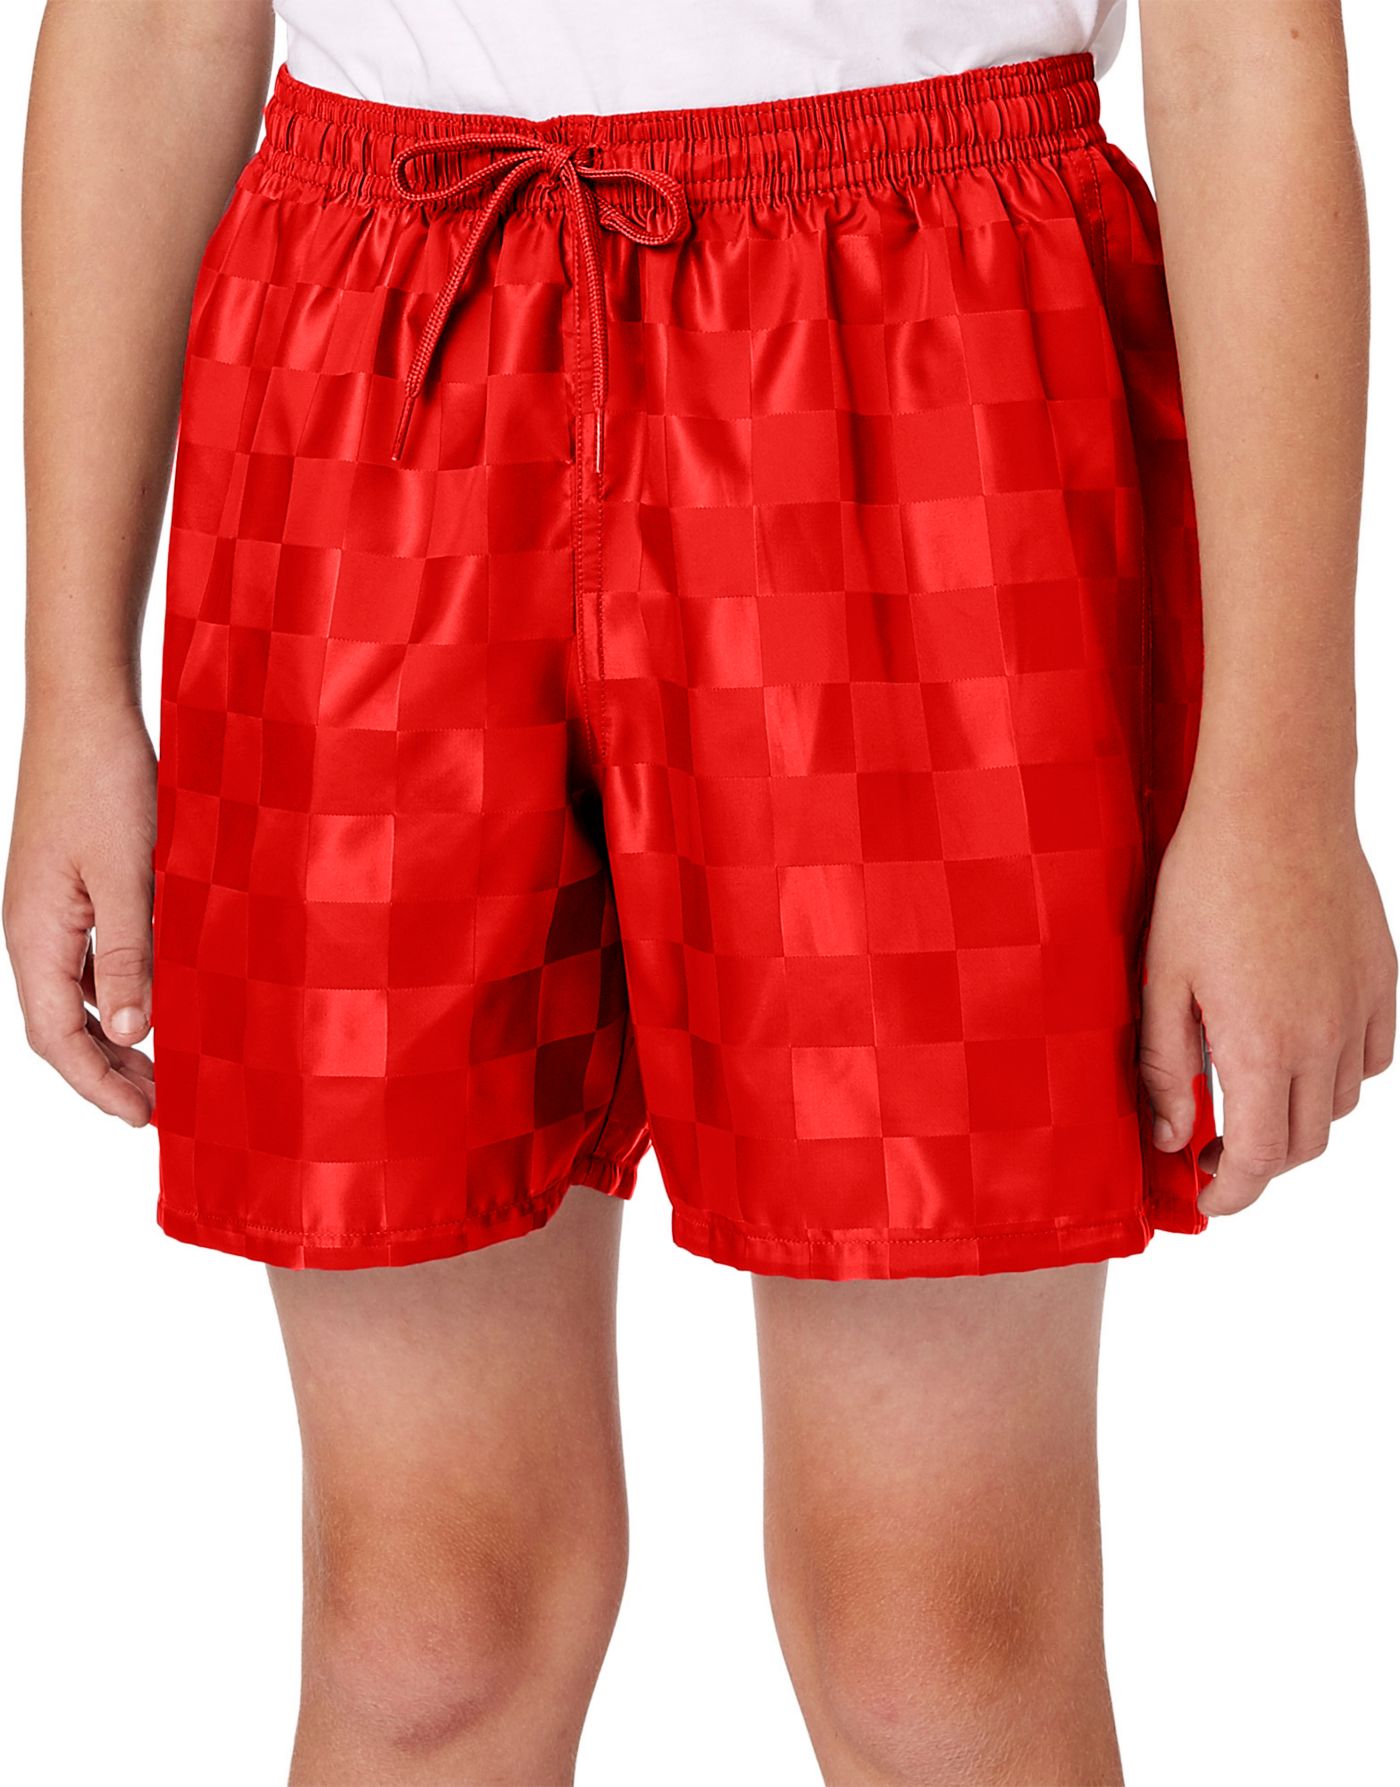 DSG Youth Woven Soccer Shorts | DICK'S Sporting Goods